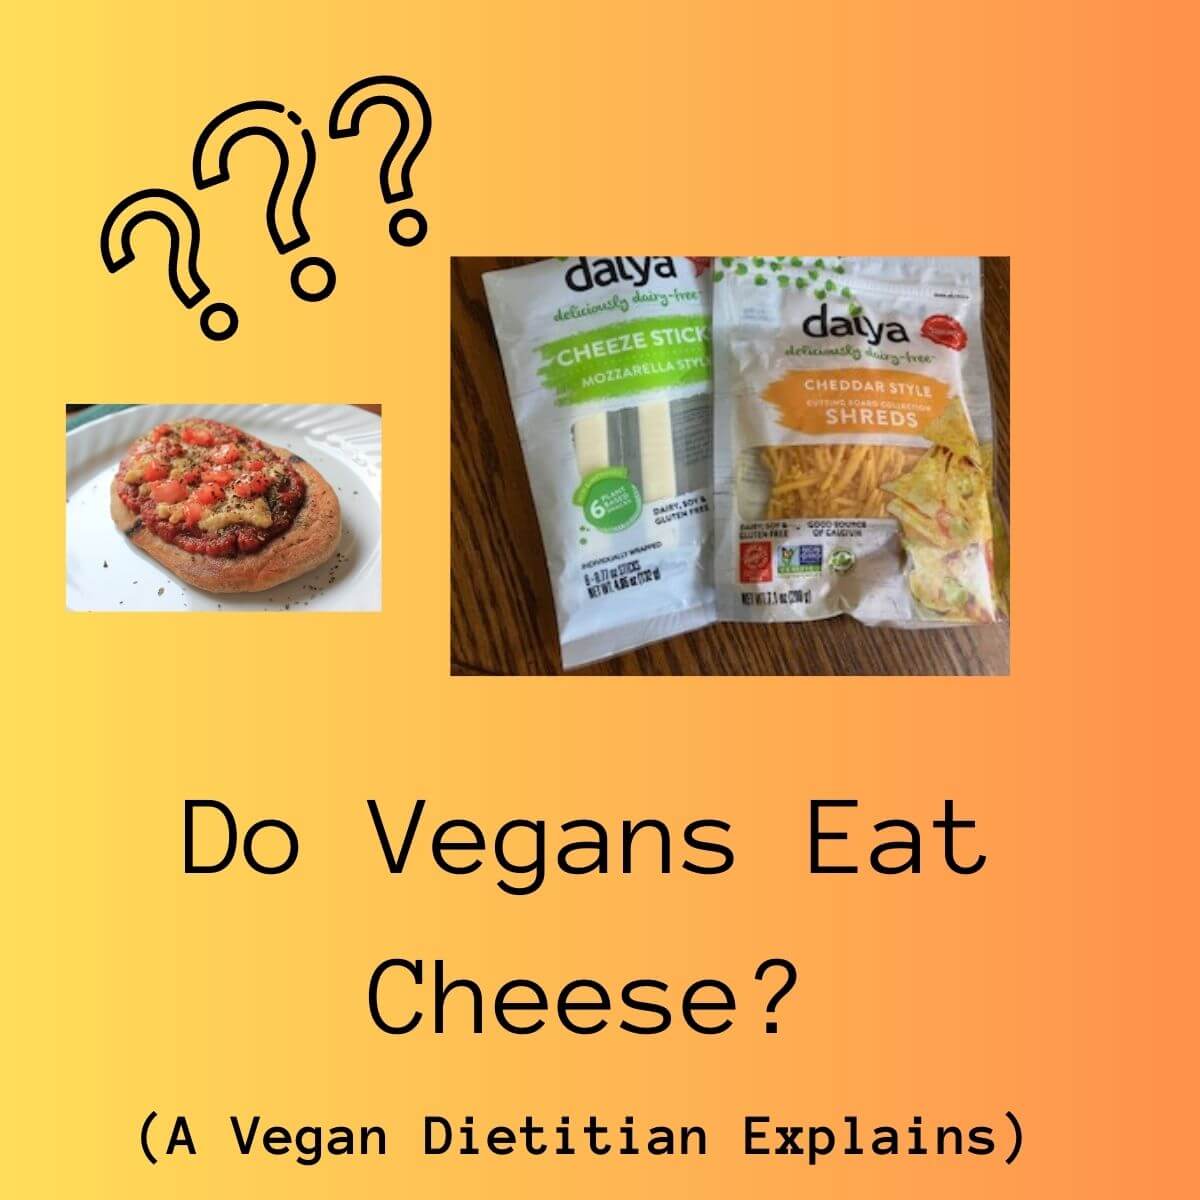 title reads: do vegans eat cheese? (a vegan dietitian explains) pictures include question marks, a picture of naan pizza with vegan cheese, and pictures of a couple daiya brand cheeses packages.